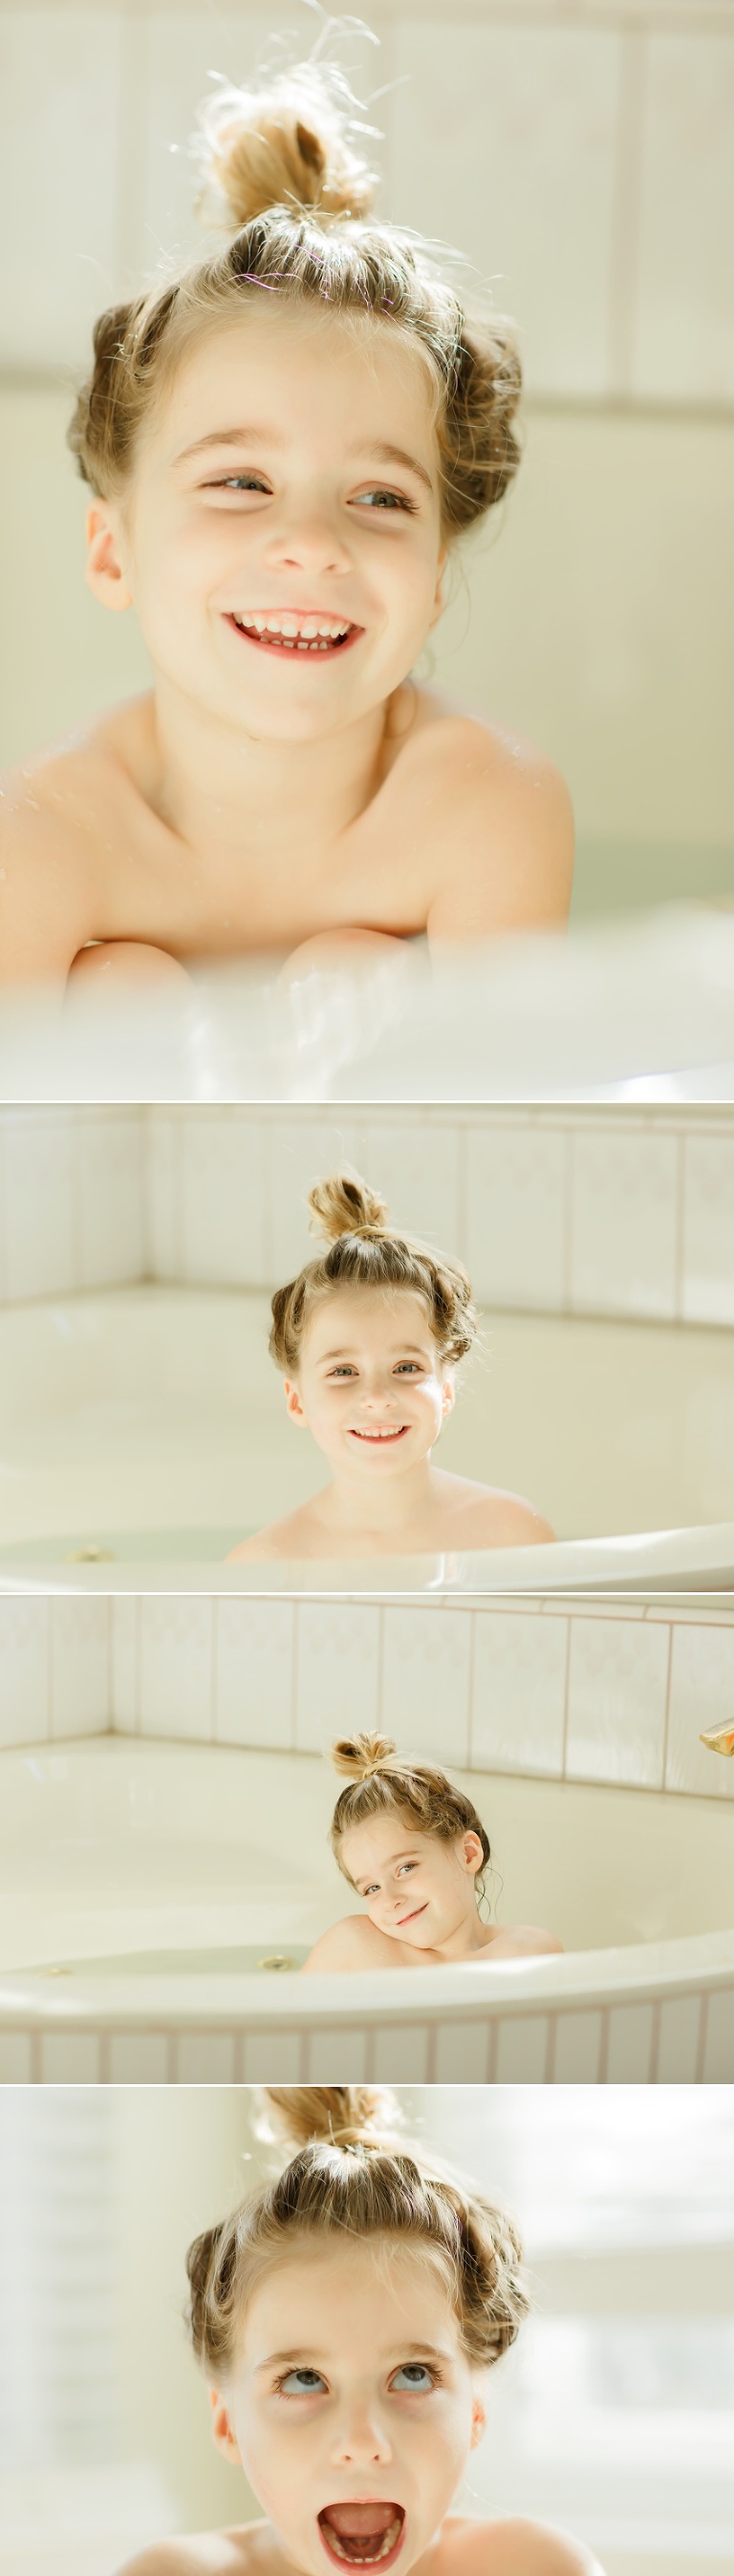 Lifestyle family pictures in El Dorado Hills for my little 4 year old during bath time by Colleen Sanders Photography.